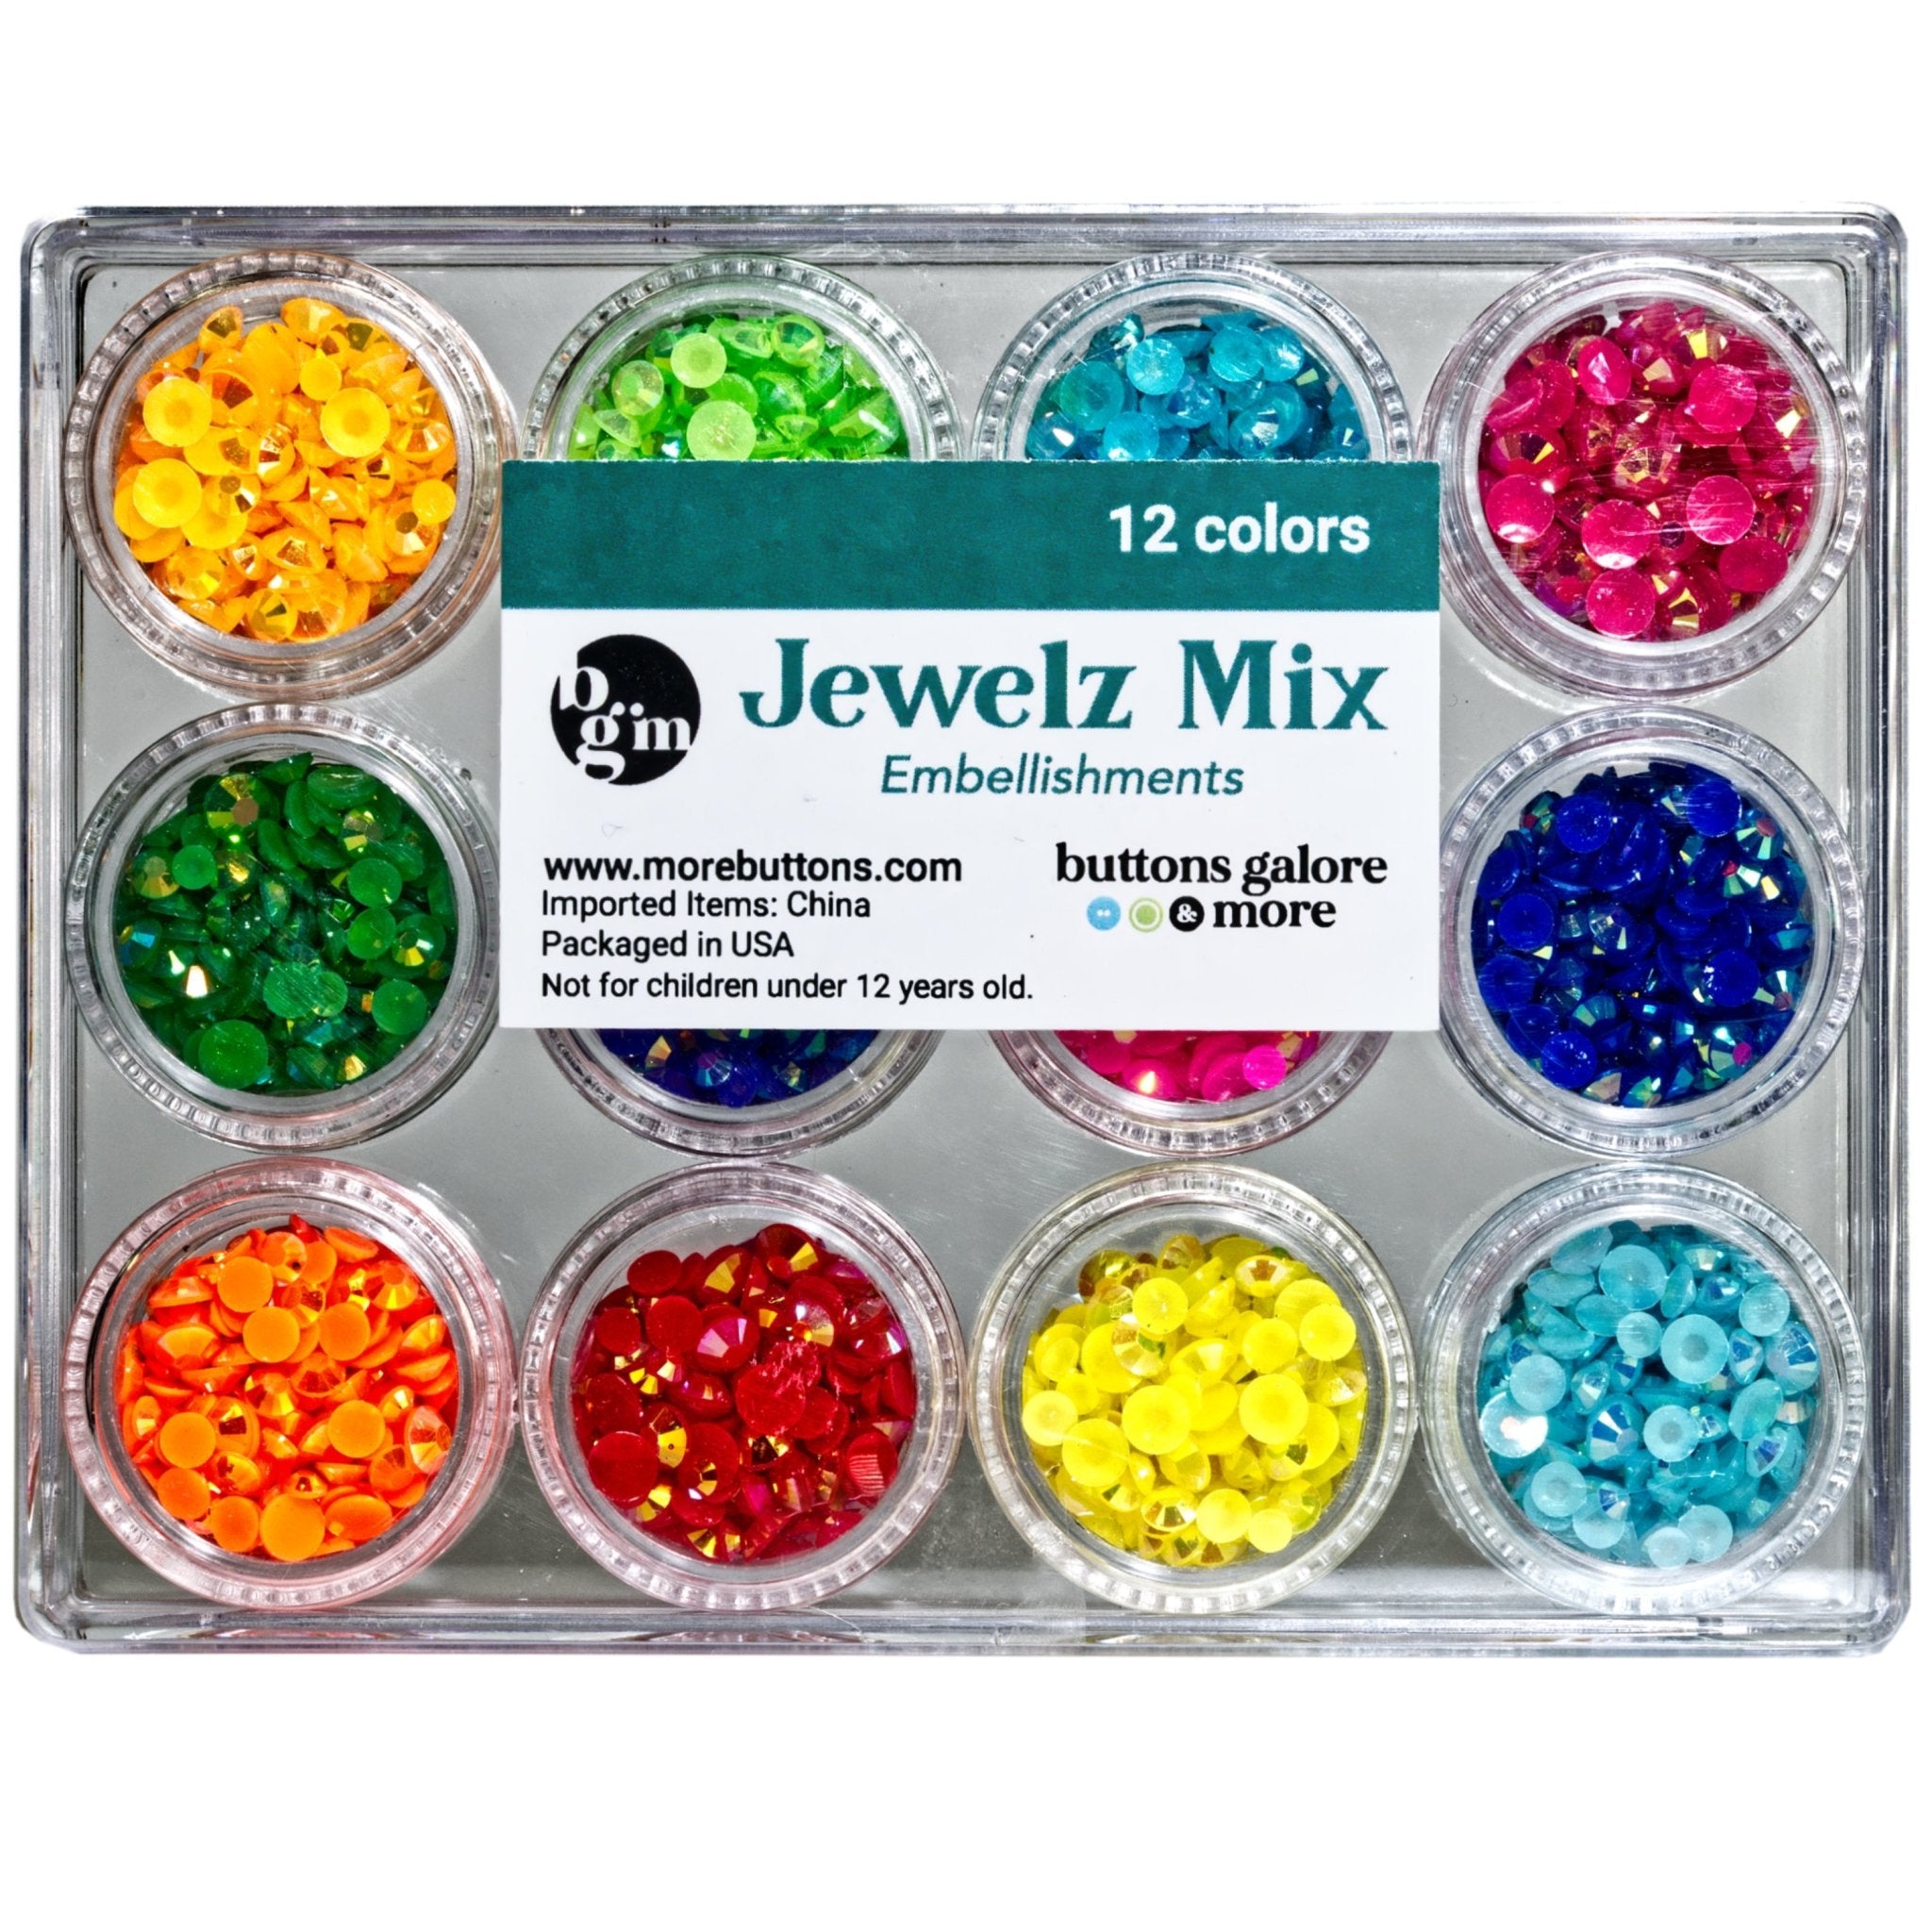 Buttons Galore & More Bright Bulk Sequins in Pinwheel Box Buttons